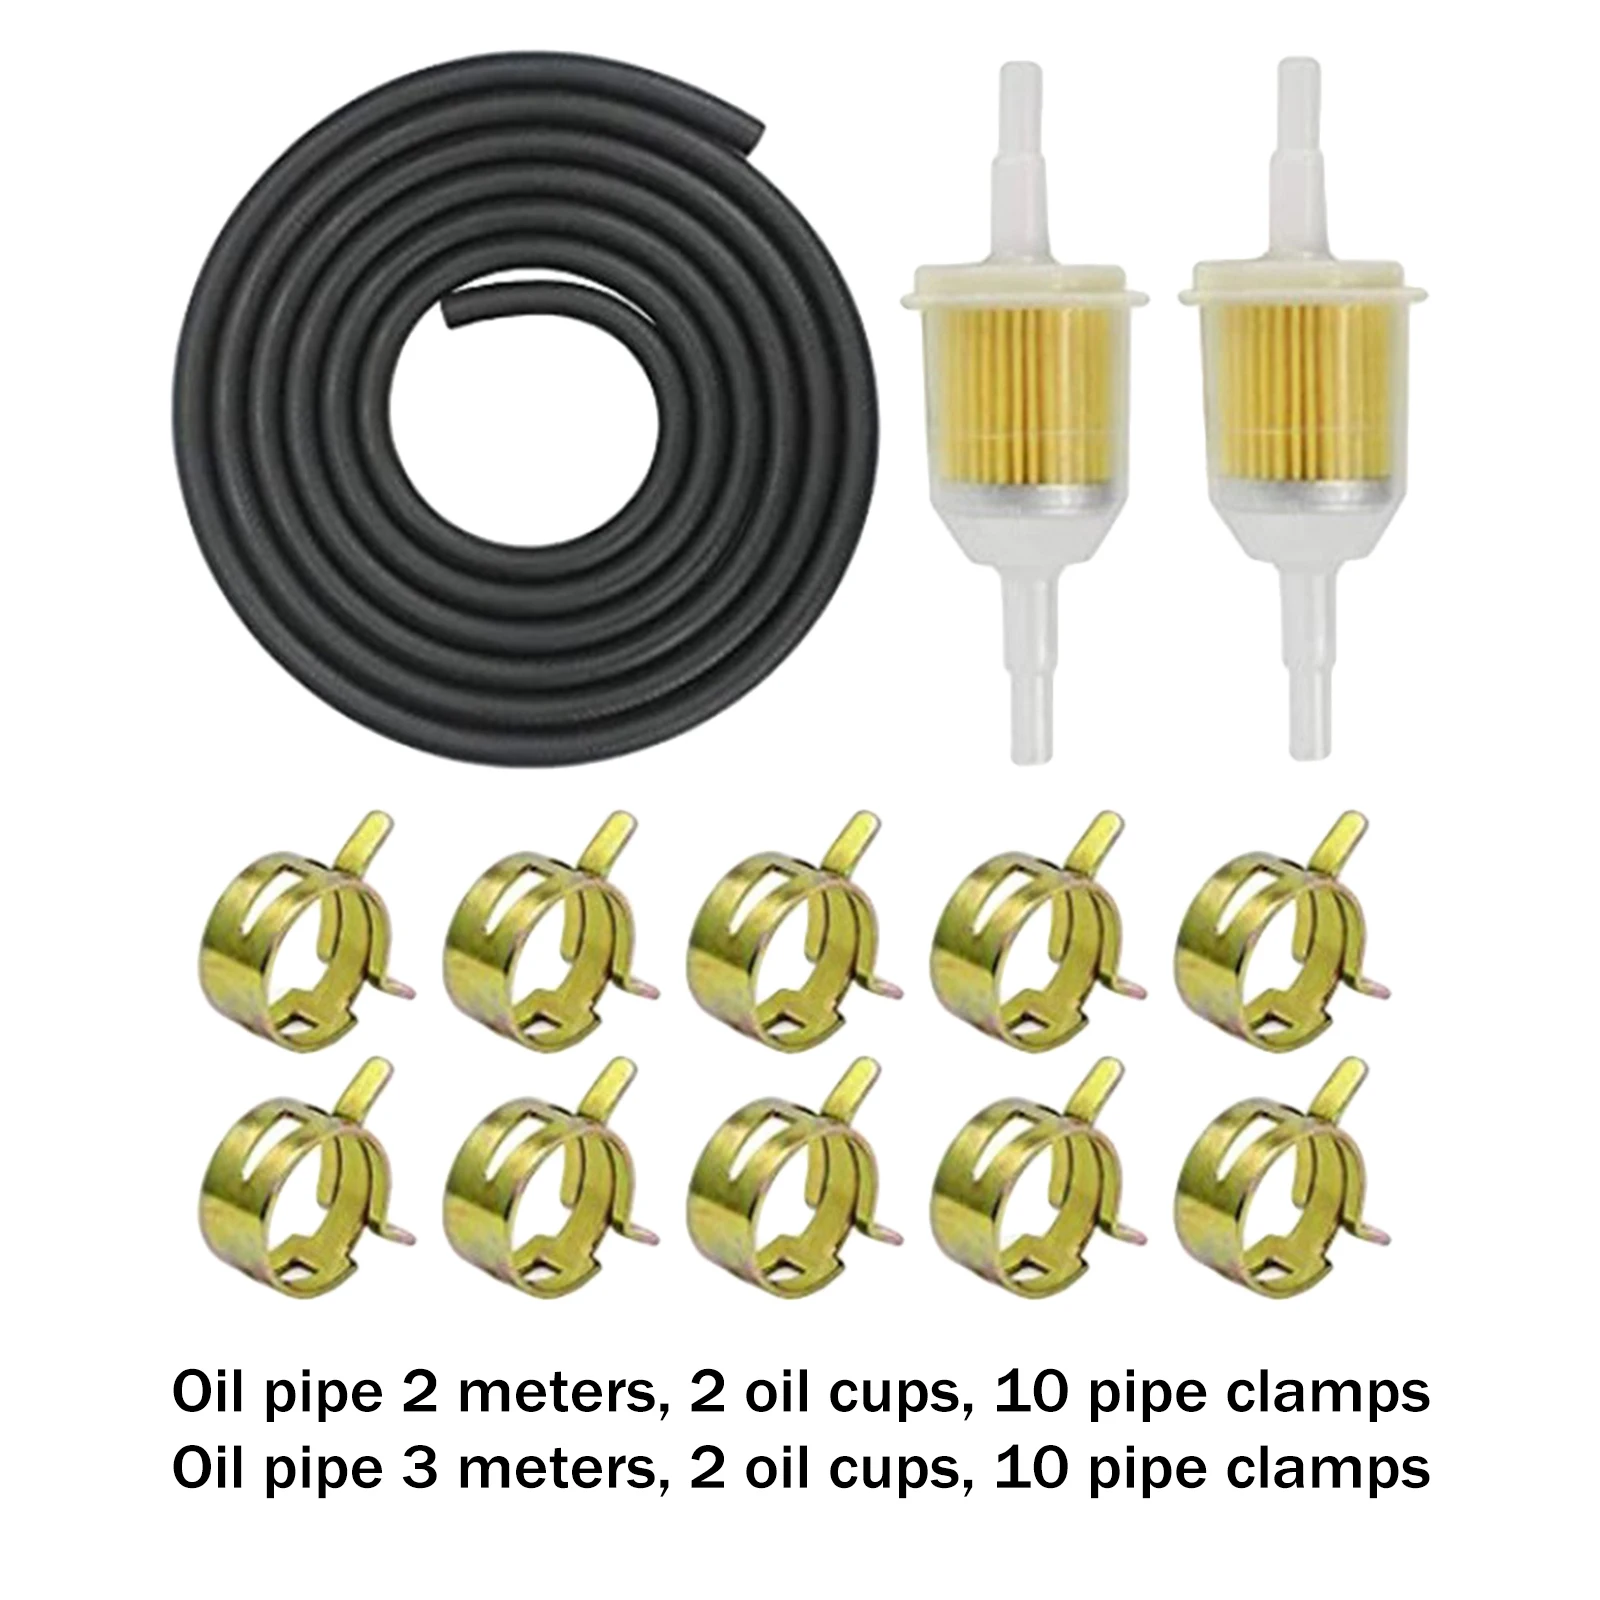 Fuel Line Hose Set 2x 8mm Oil Filters 10pc Hose Clamps for Lawn Mowers Motorcycles Weight Machines Parts